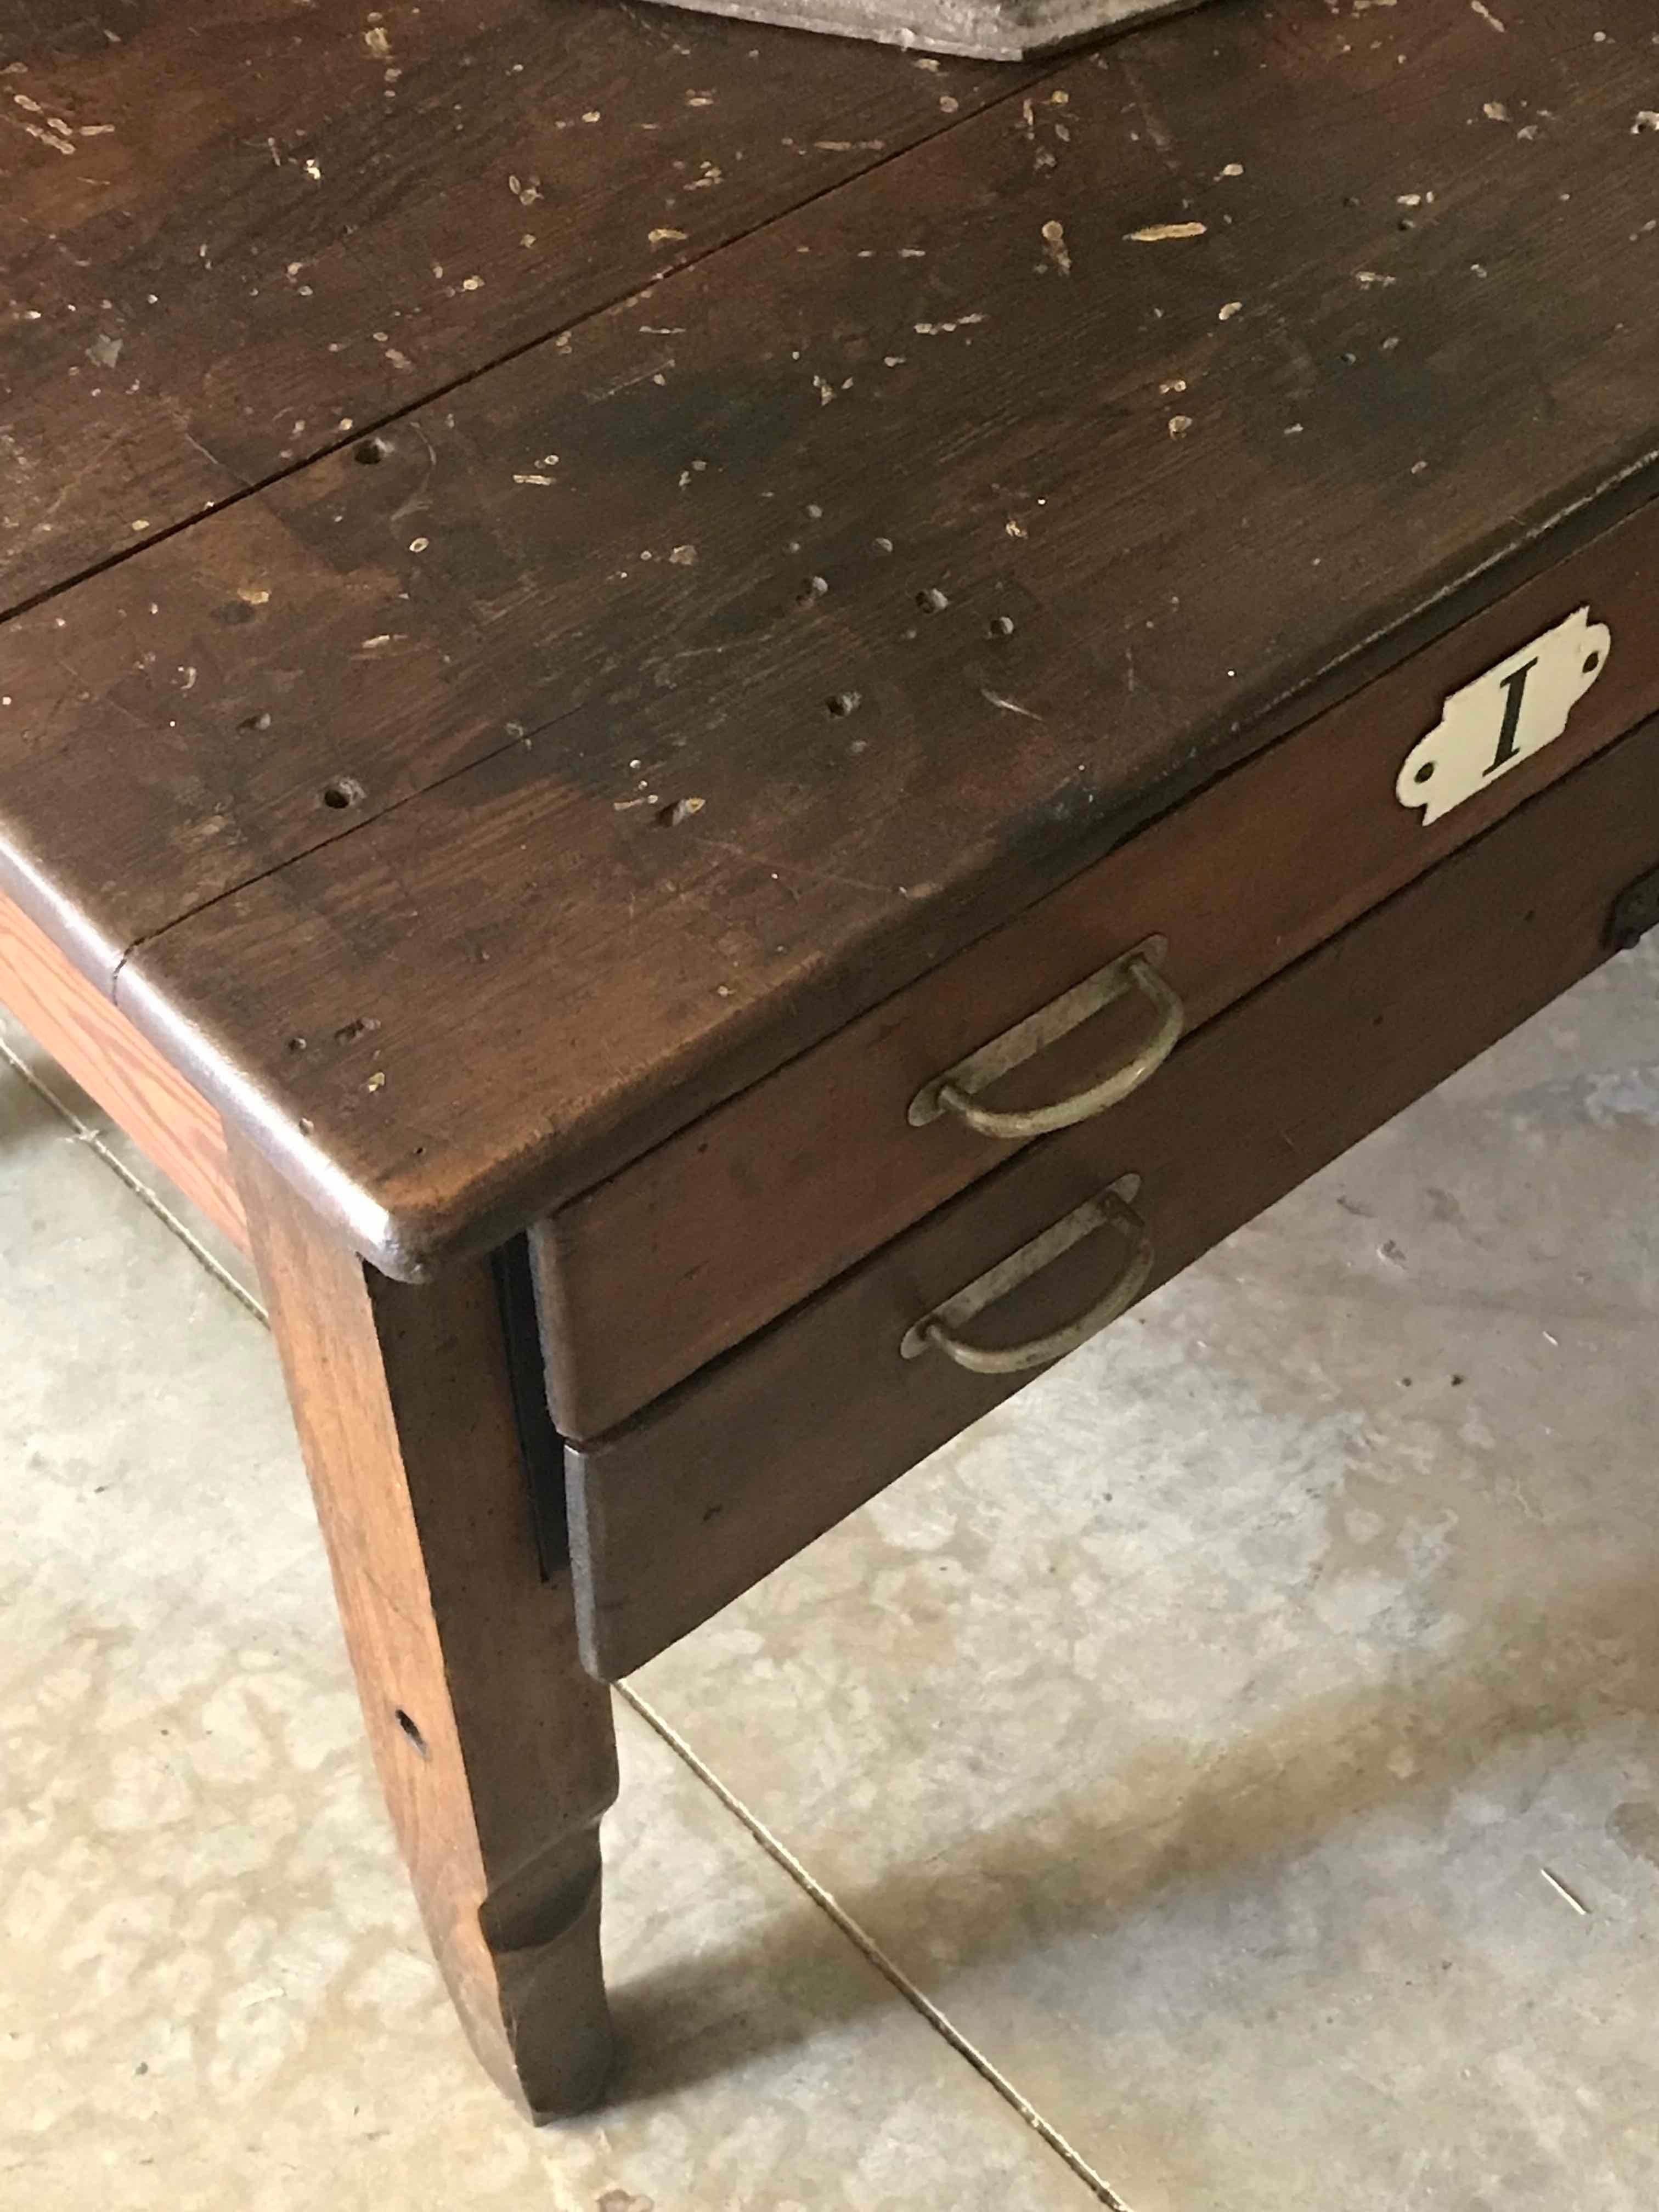 A table with drawers as coffee table.